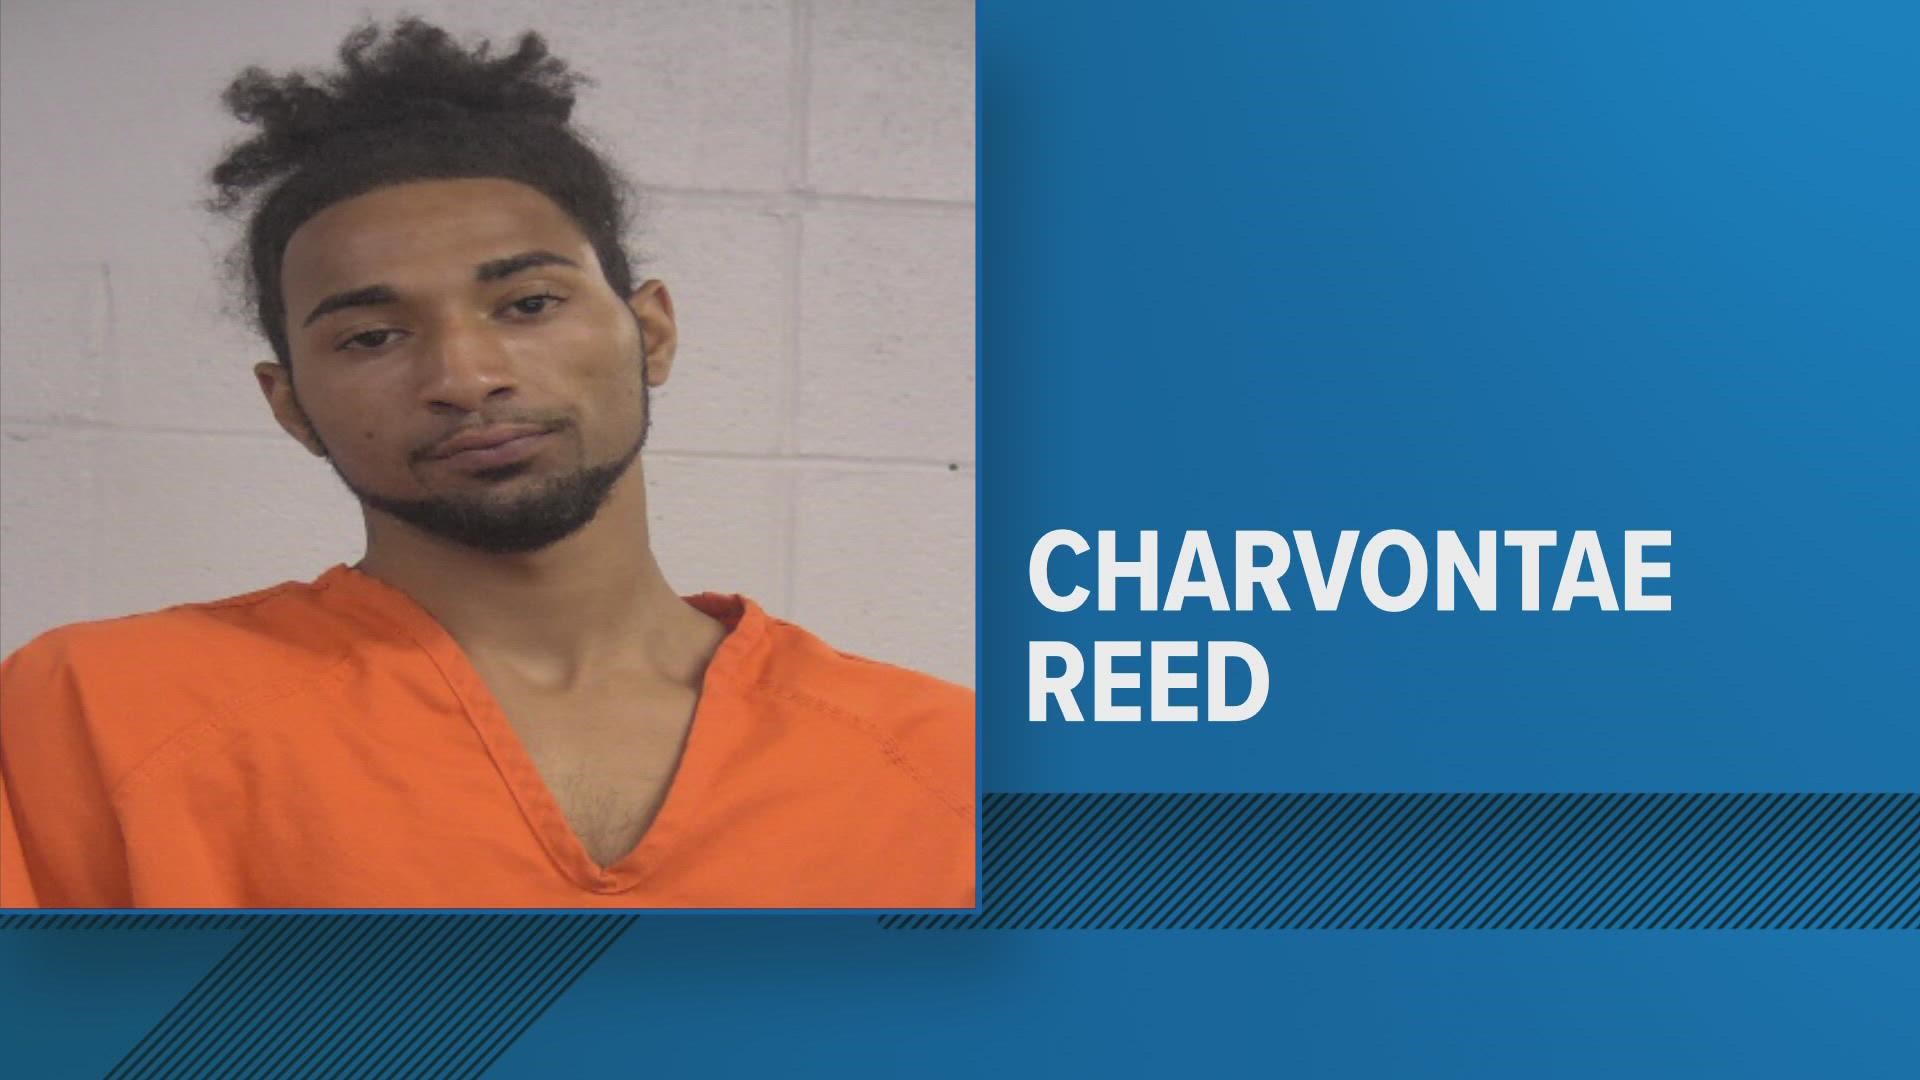 Charvonte Reed, 21, has been arrested in the shooting death of 34-year-old Vincent Crutcher on Heatherview Road Thursday. Crutcher died Friday night.